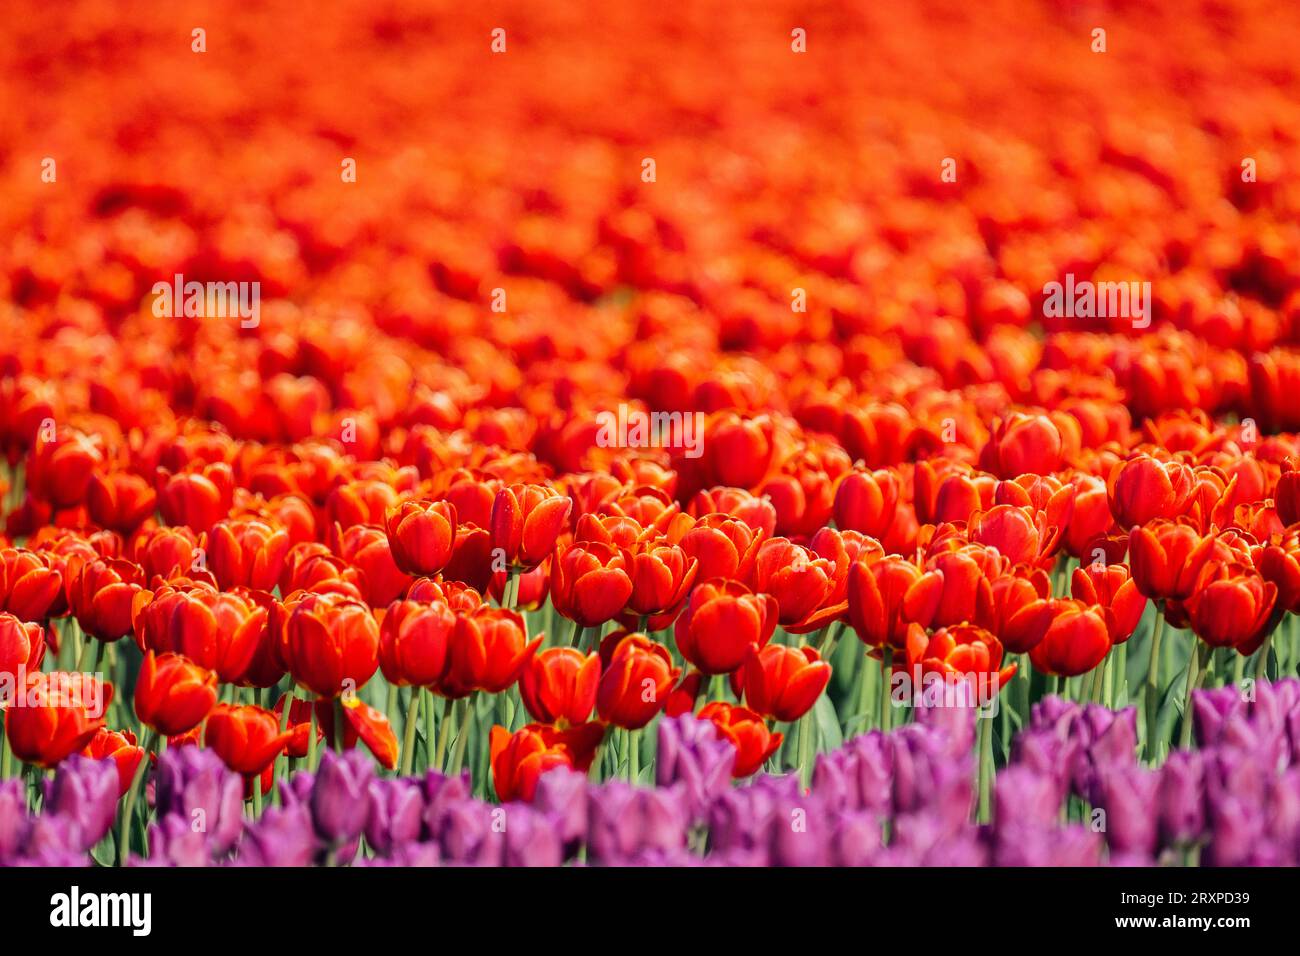 Field of red tulips Stock Photo